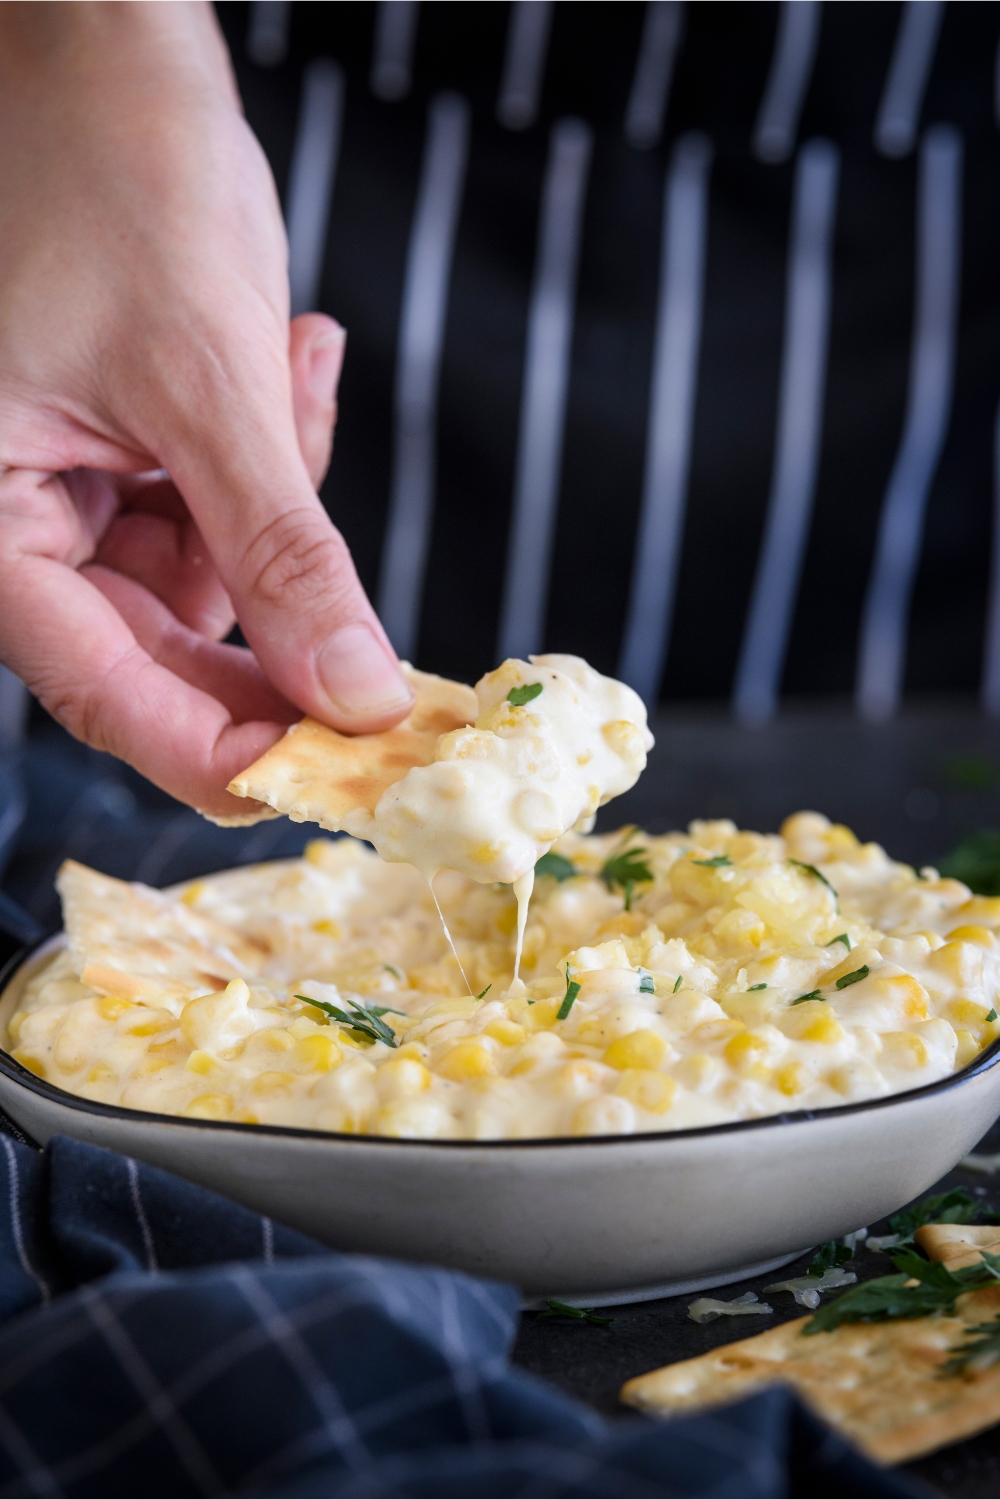 A cracker being dipped into a bowl of cream cheese corn garnished with parsley.